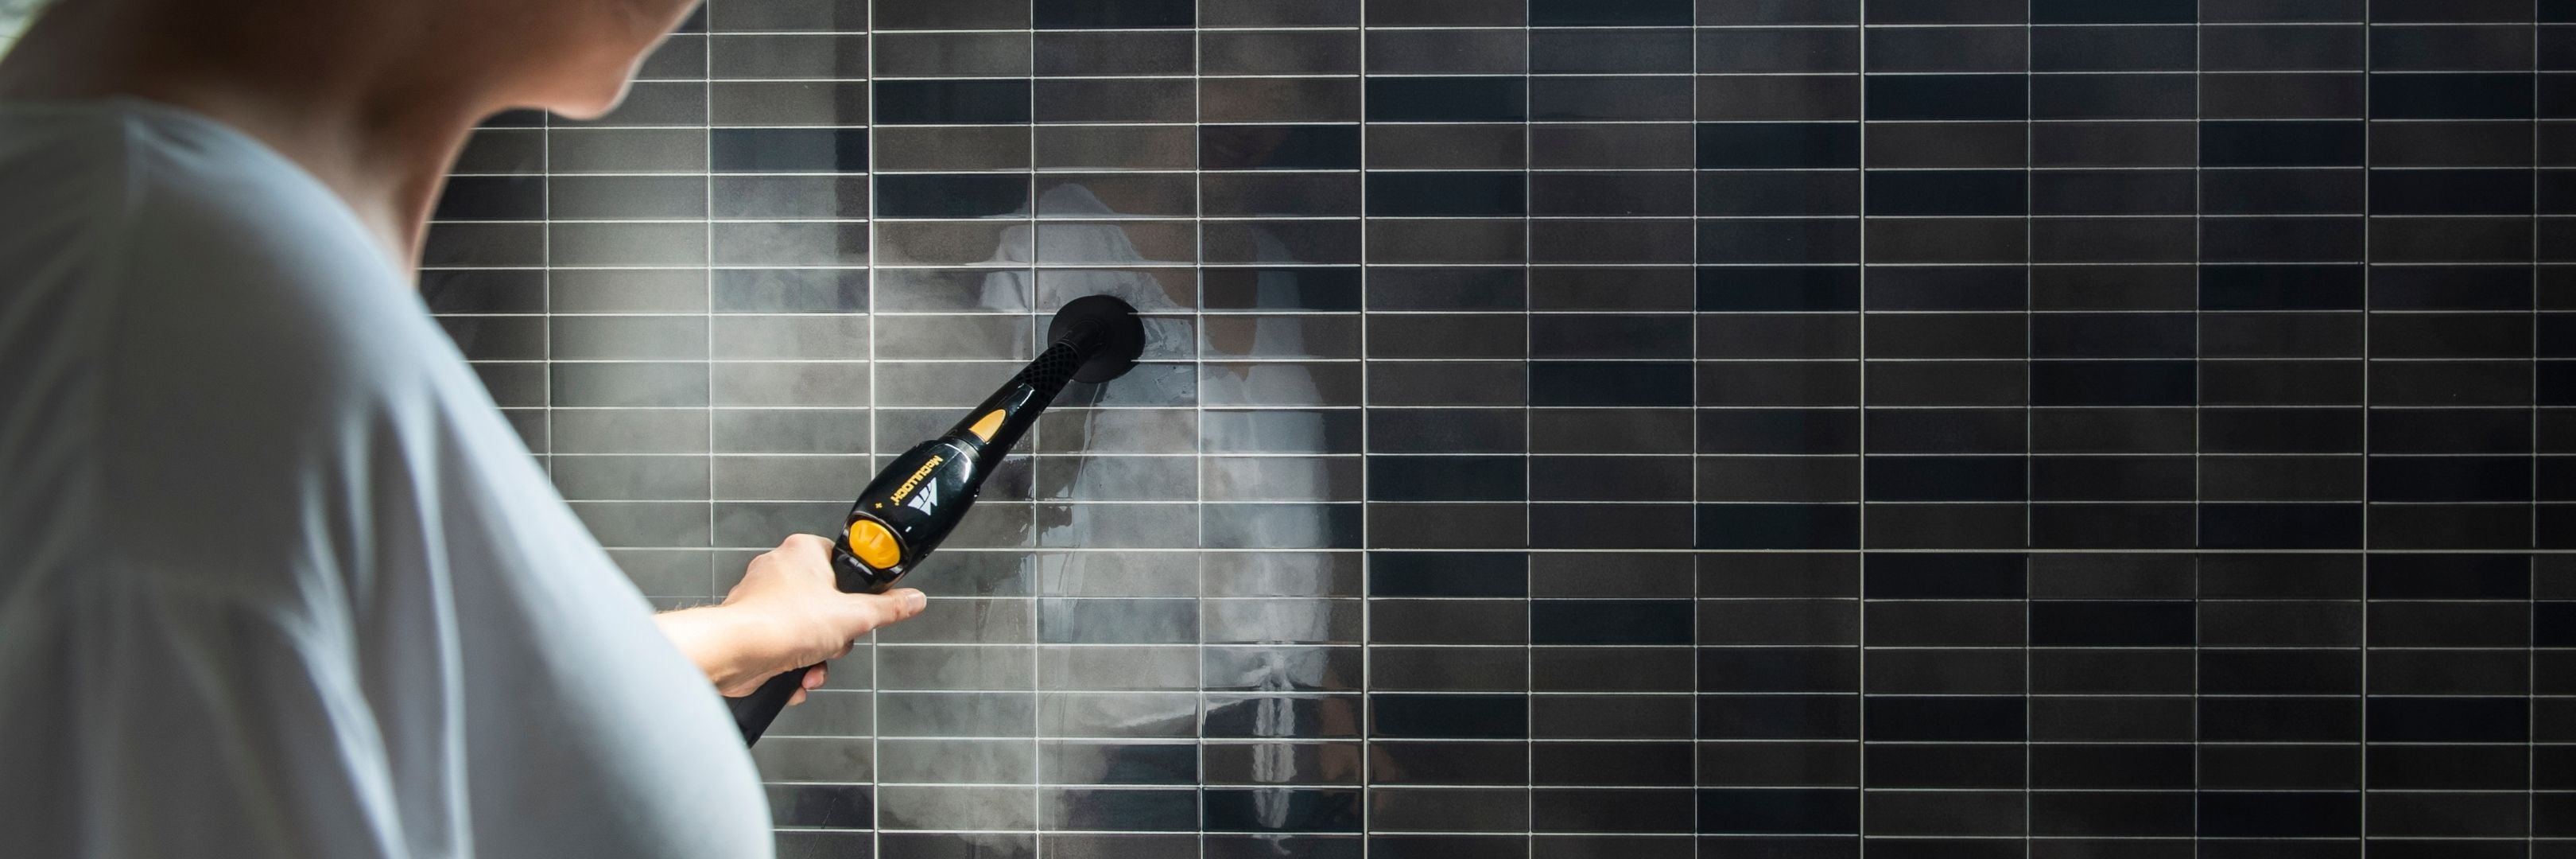 Woman cleaning bathroom wall tiles with McCulloch Steam Cleaner.